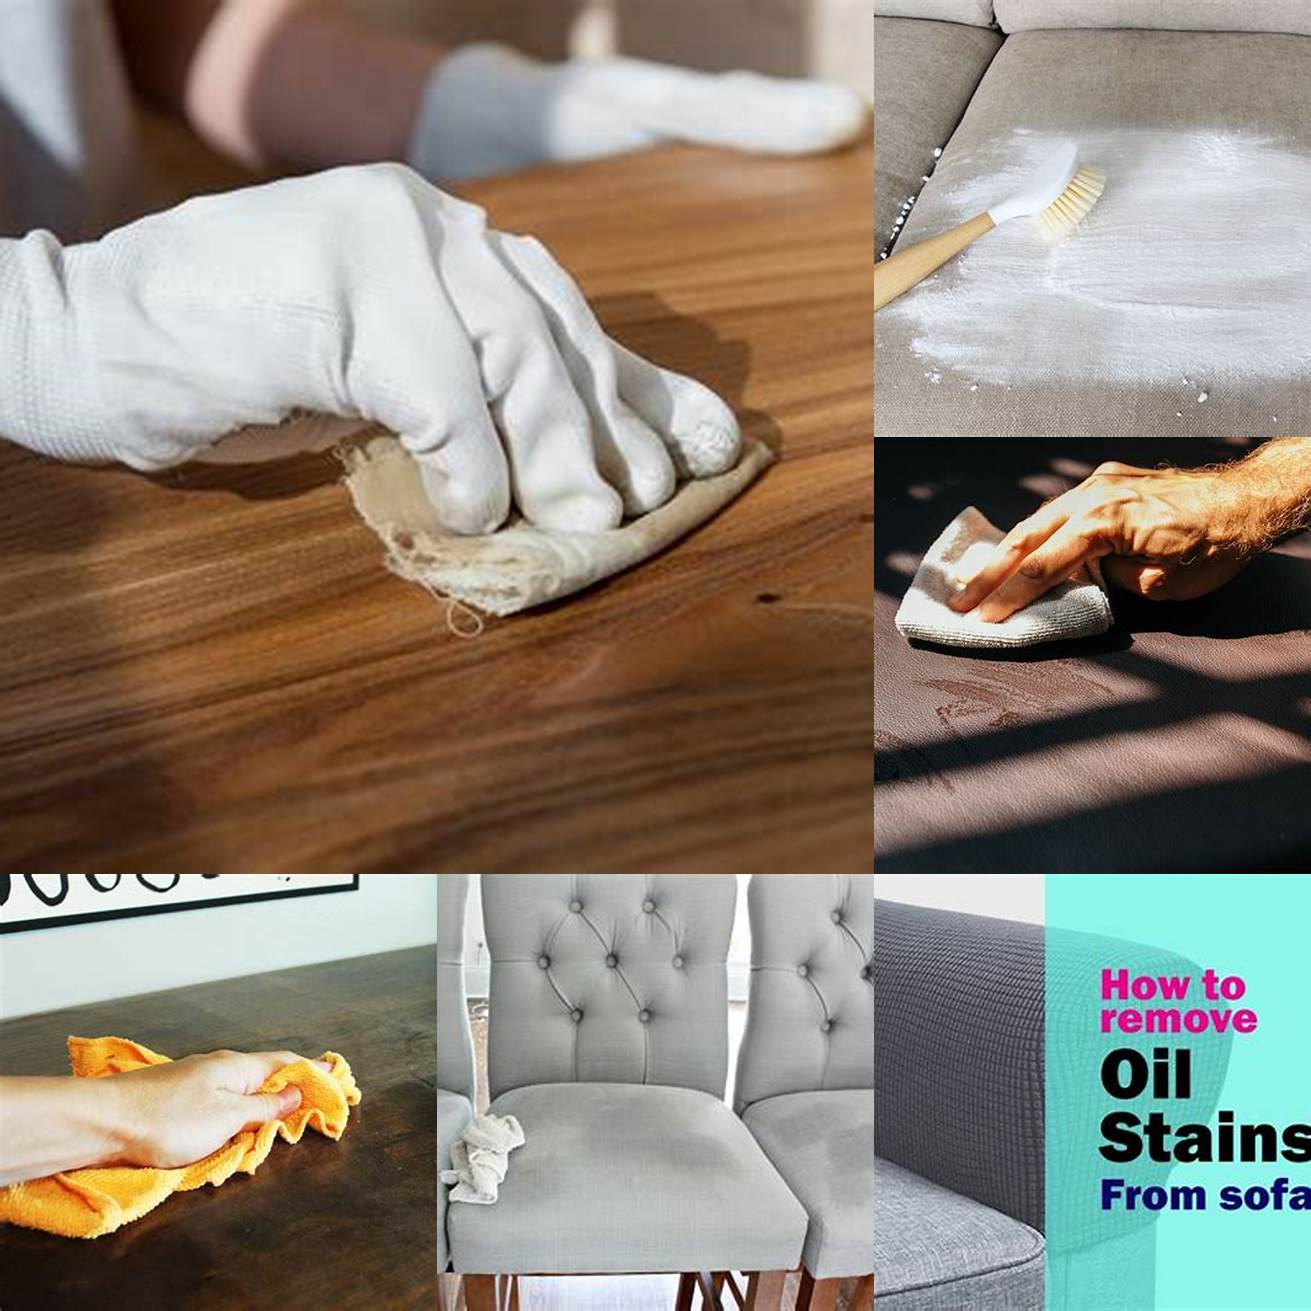 Using a damp cloth to remove oil